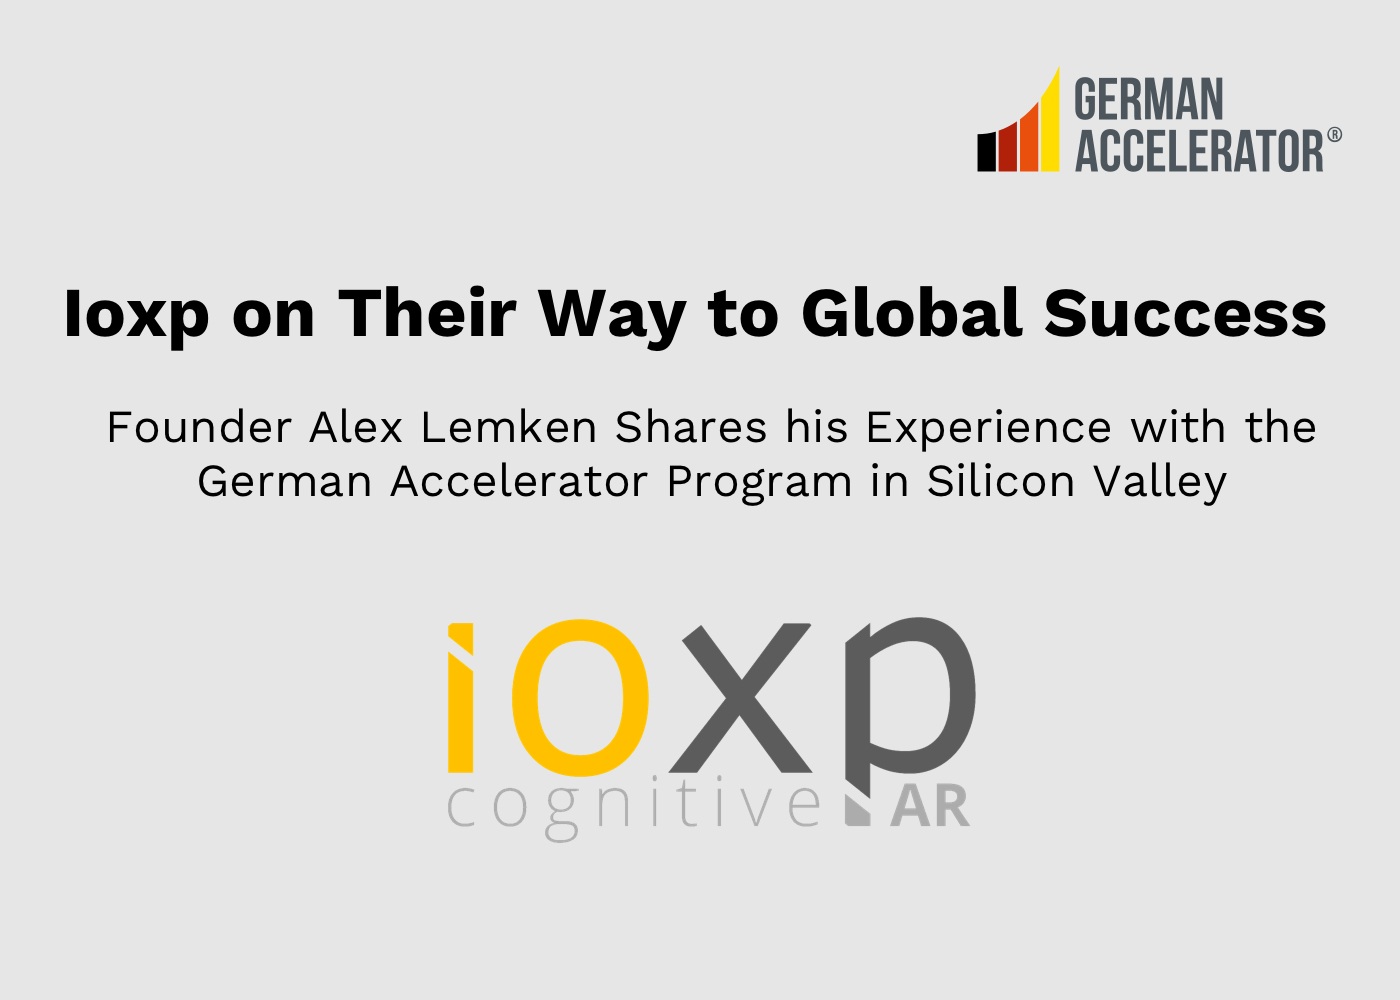 Ioxp on Their Way to Global Success